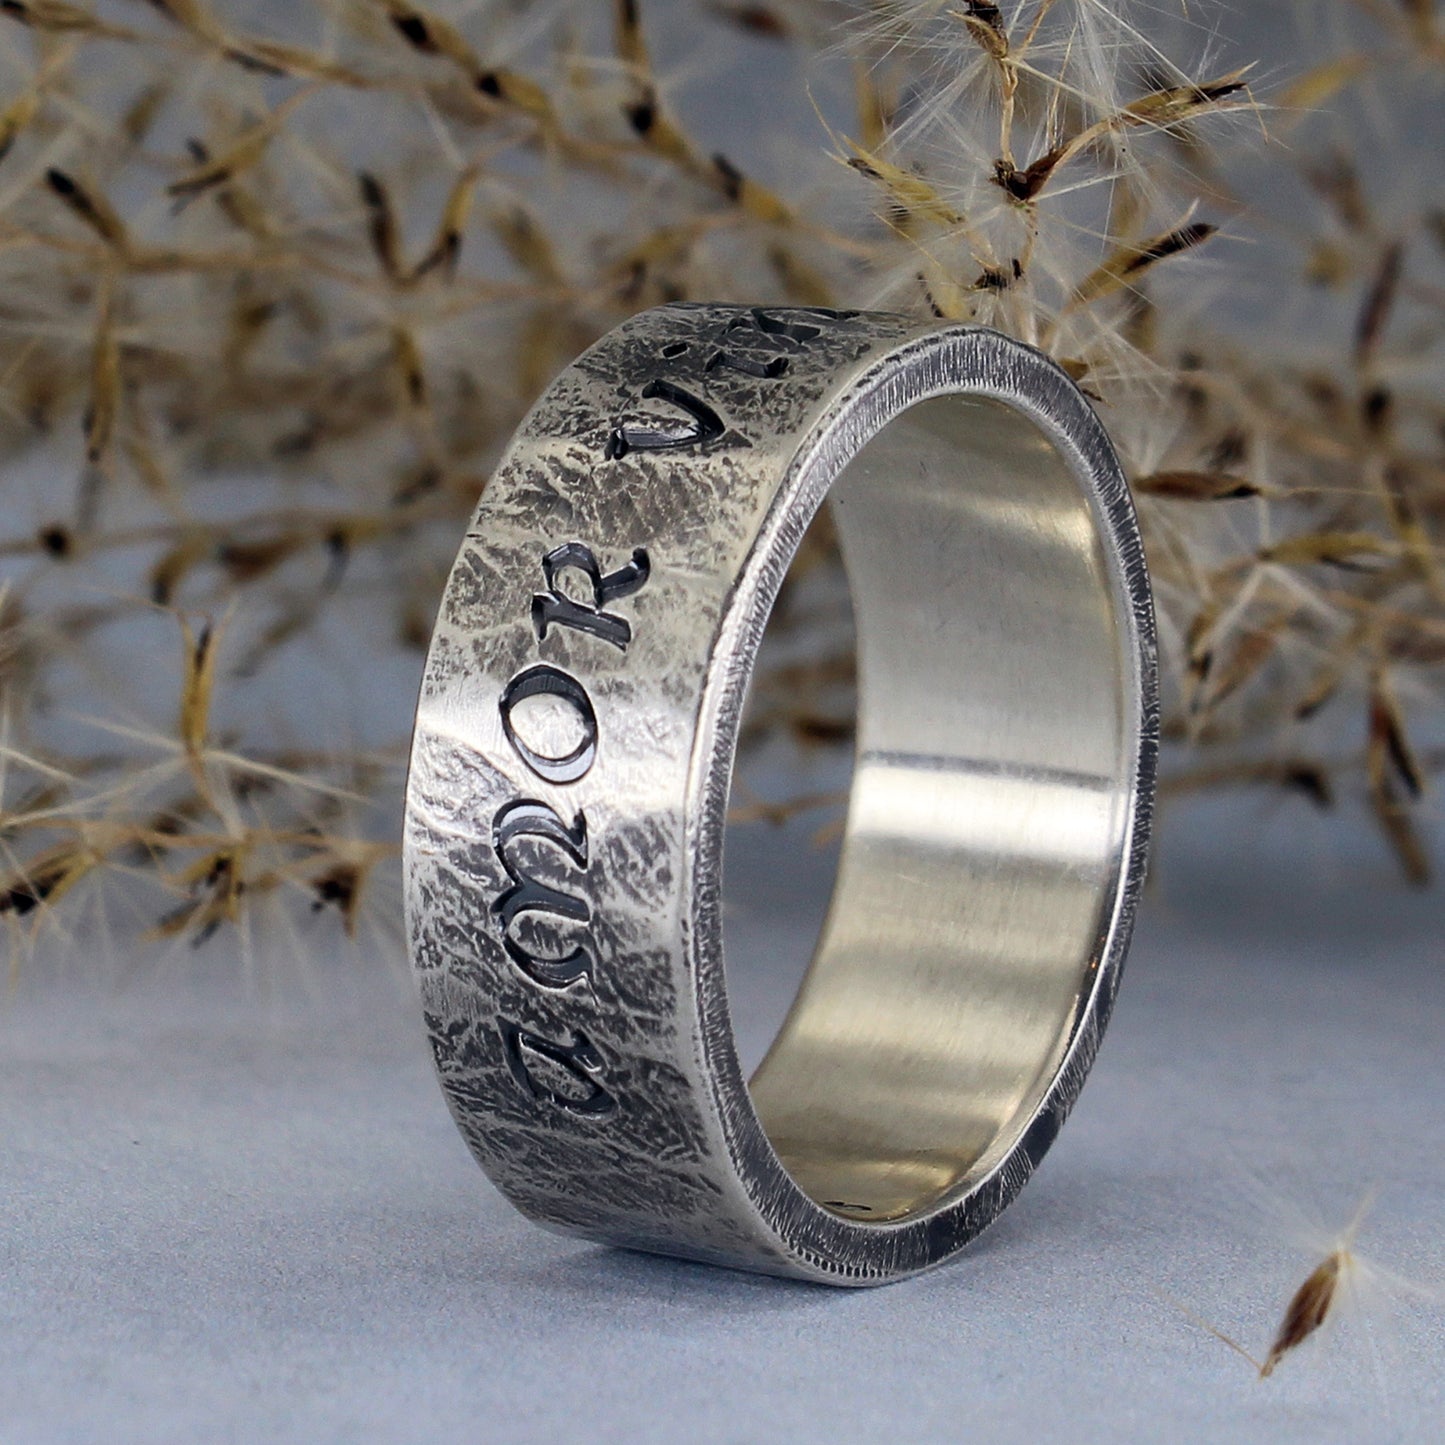 Amor Vincit Omnia ring, rustic silver ring with inscription